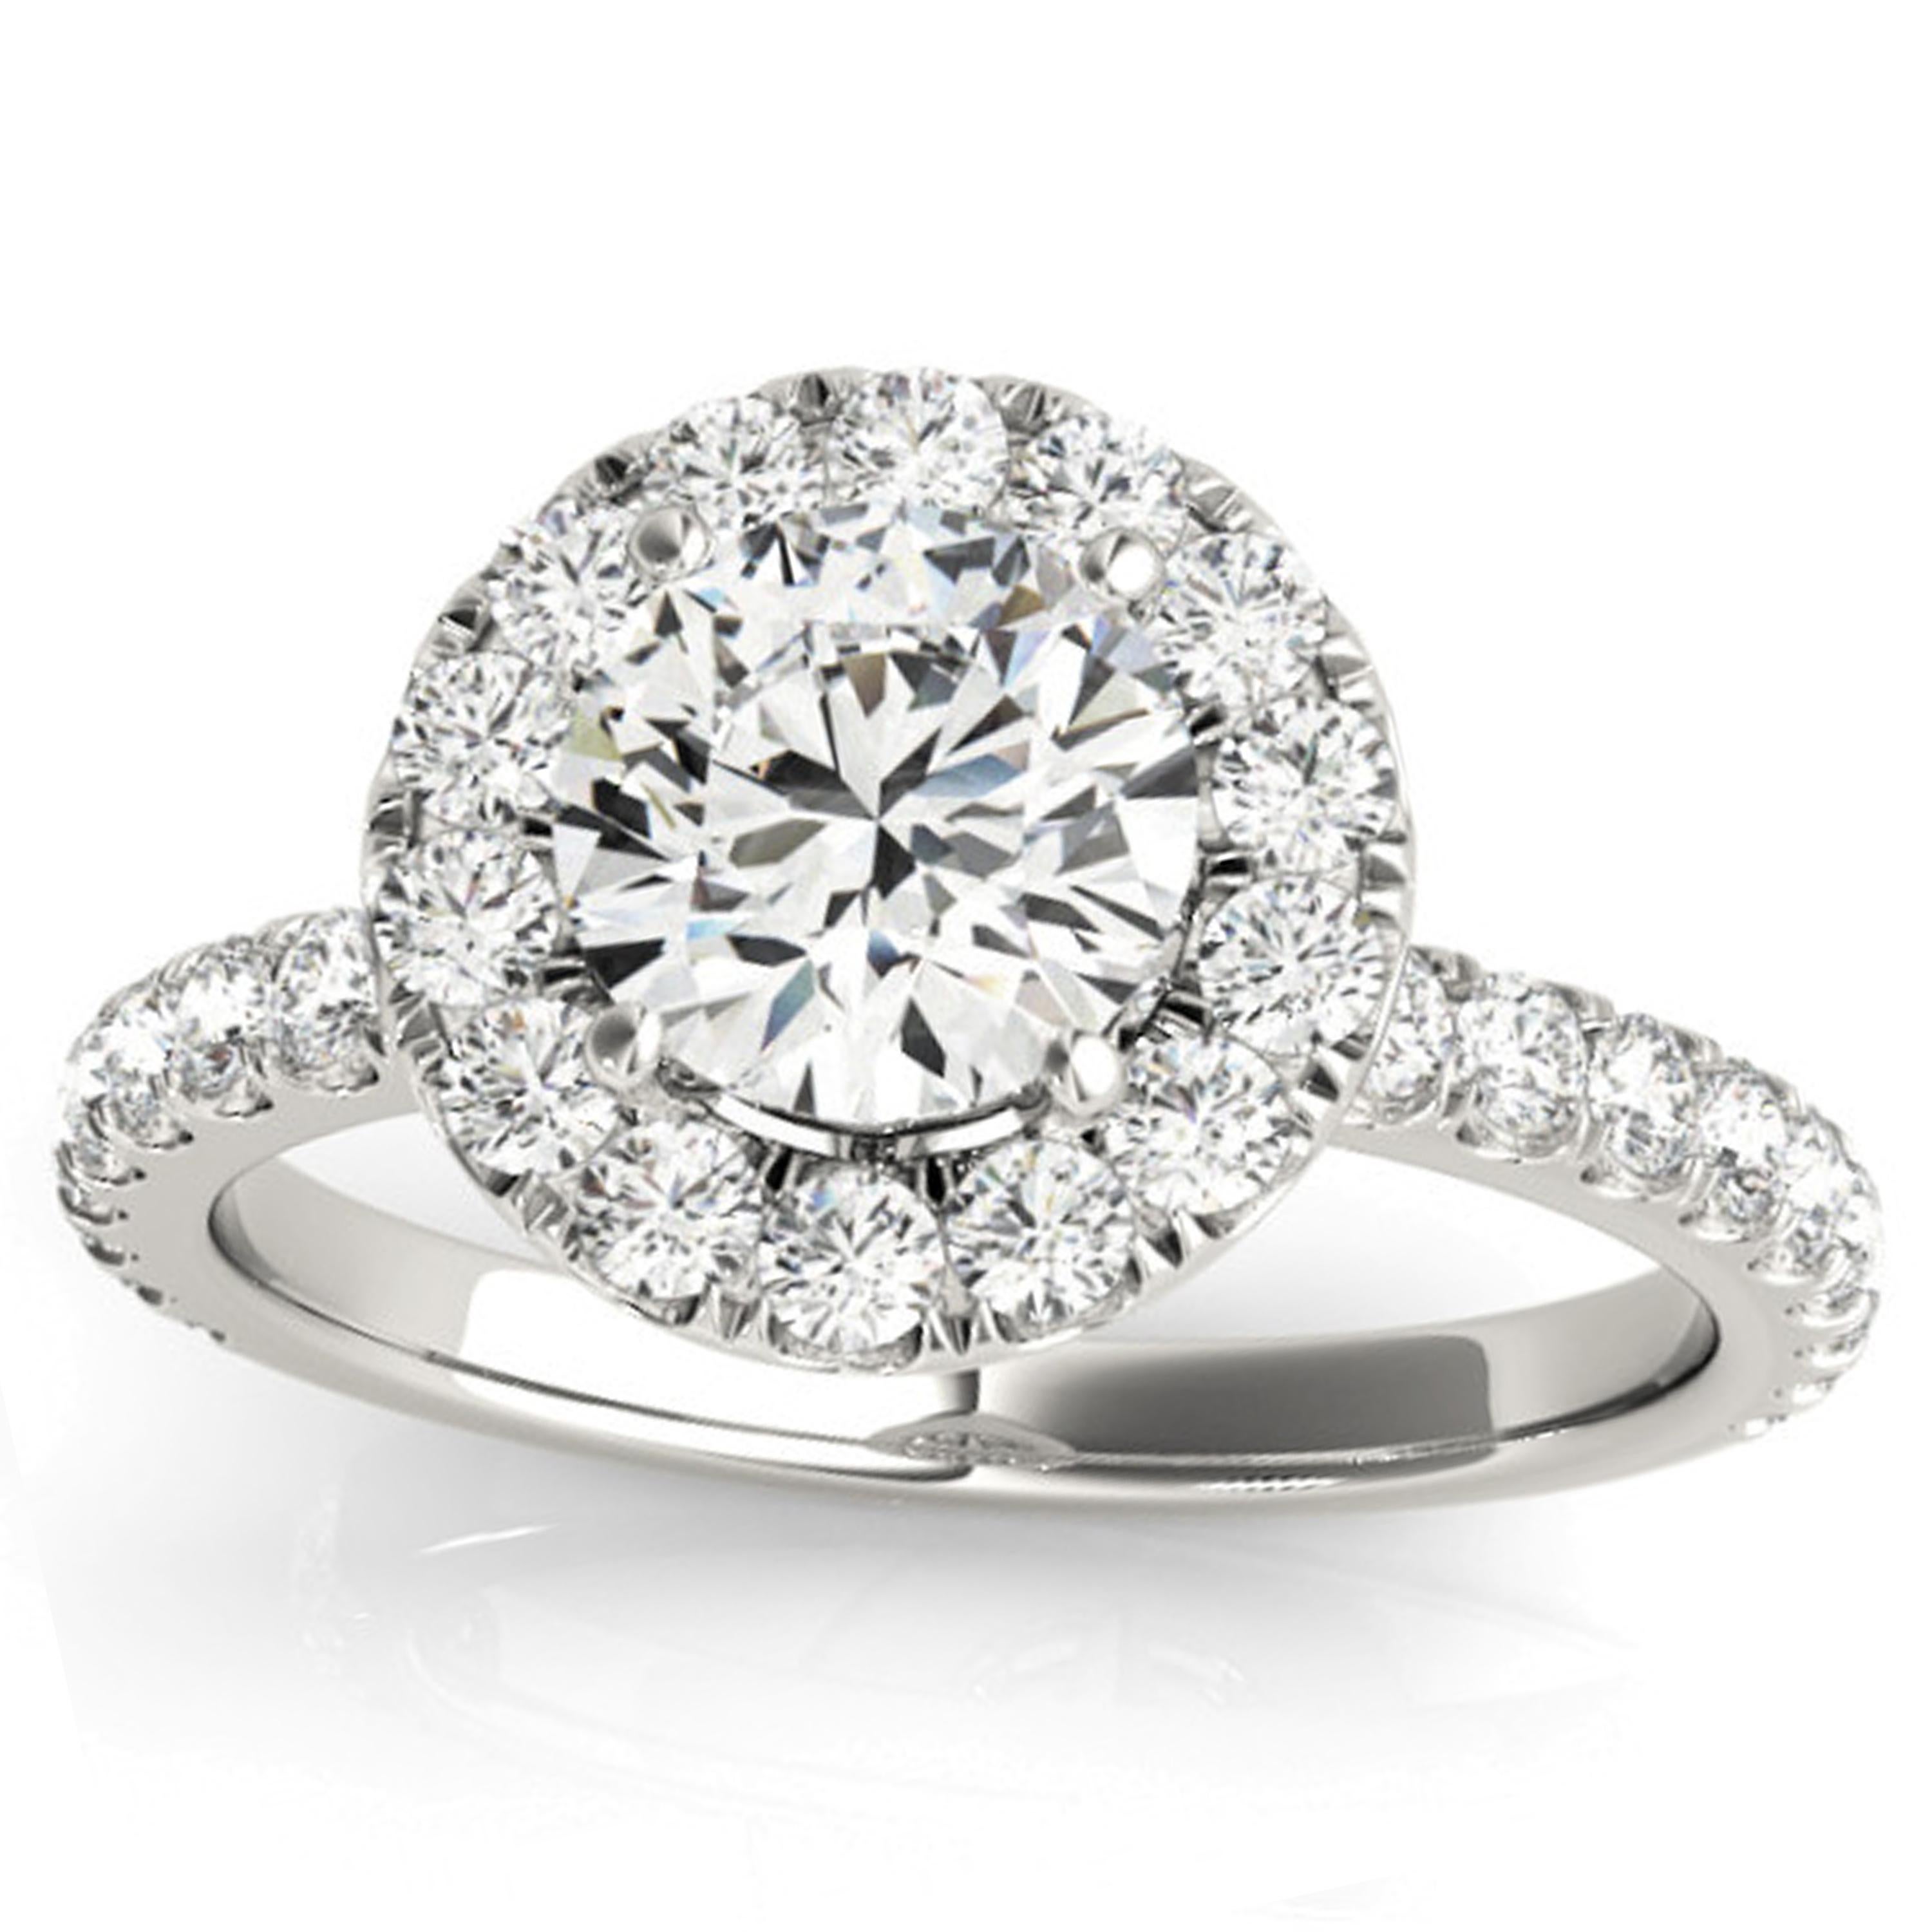 Shimmering white diamonds dance delicately along the shank and surround the halo of this Valorenna one of a kind engagement ring. The GIA certified center stone shines admirably and appears bigger in this halo setting.

Matching Band Is Not